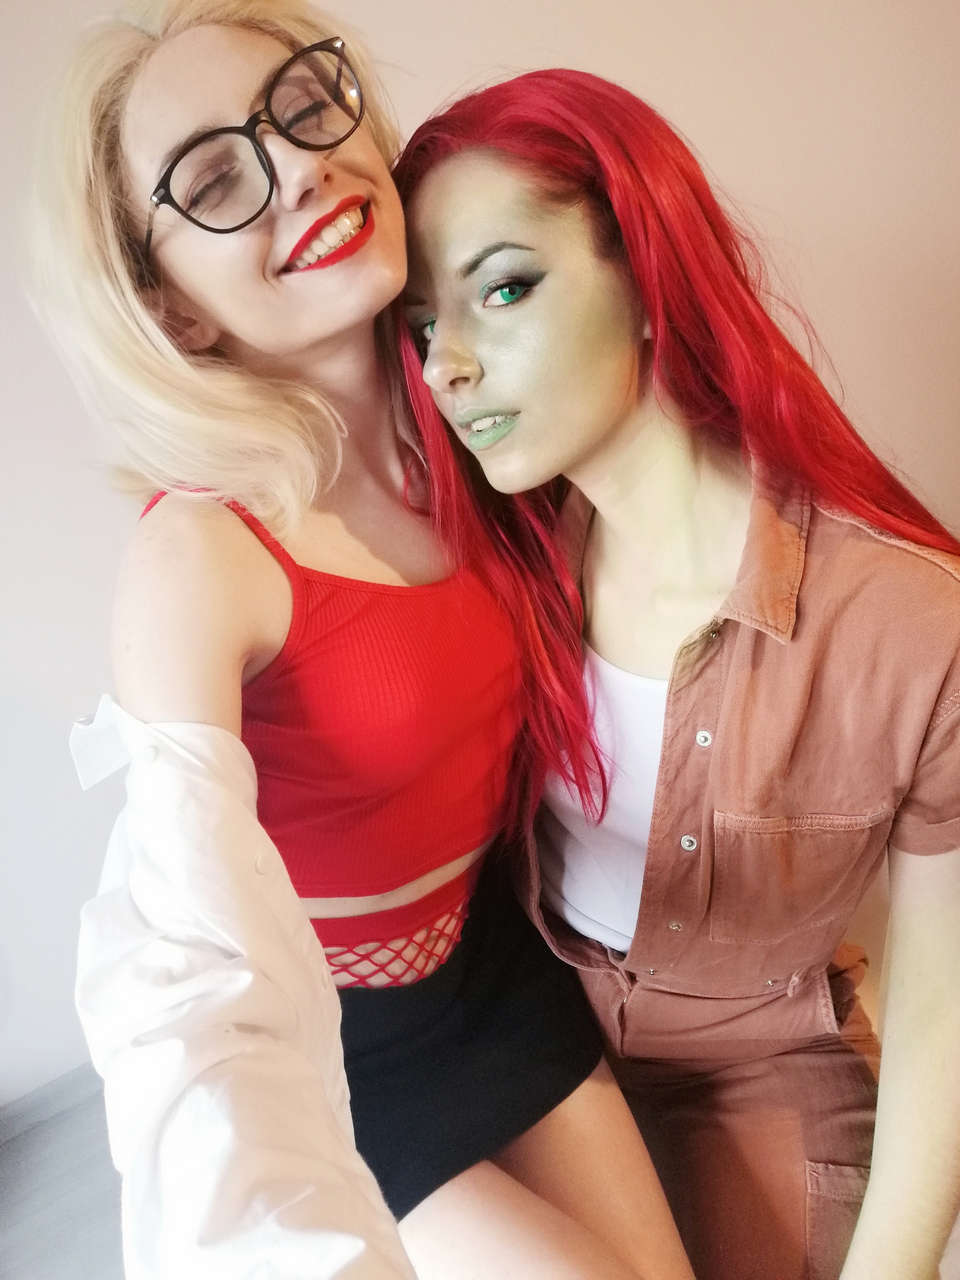 Harleen Quinzel And Poison Ivy Harley Quinn By Carrykey And Truewolf